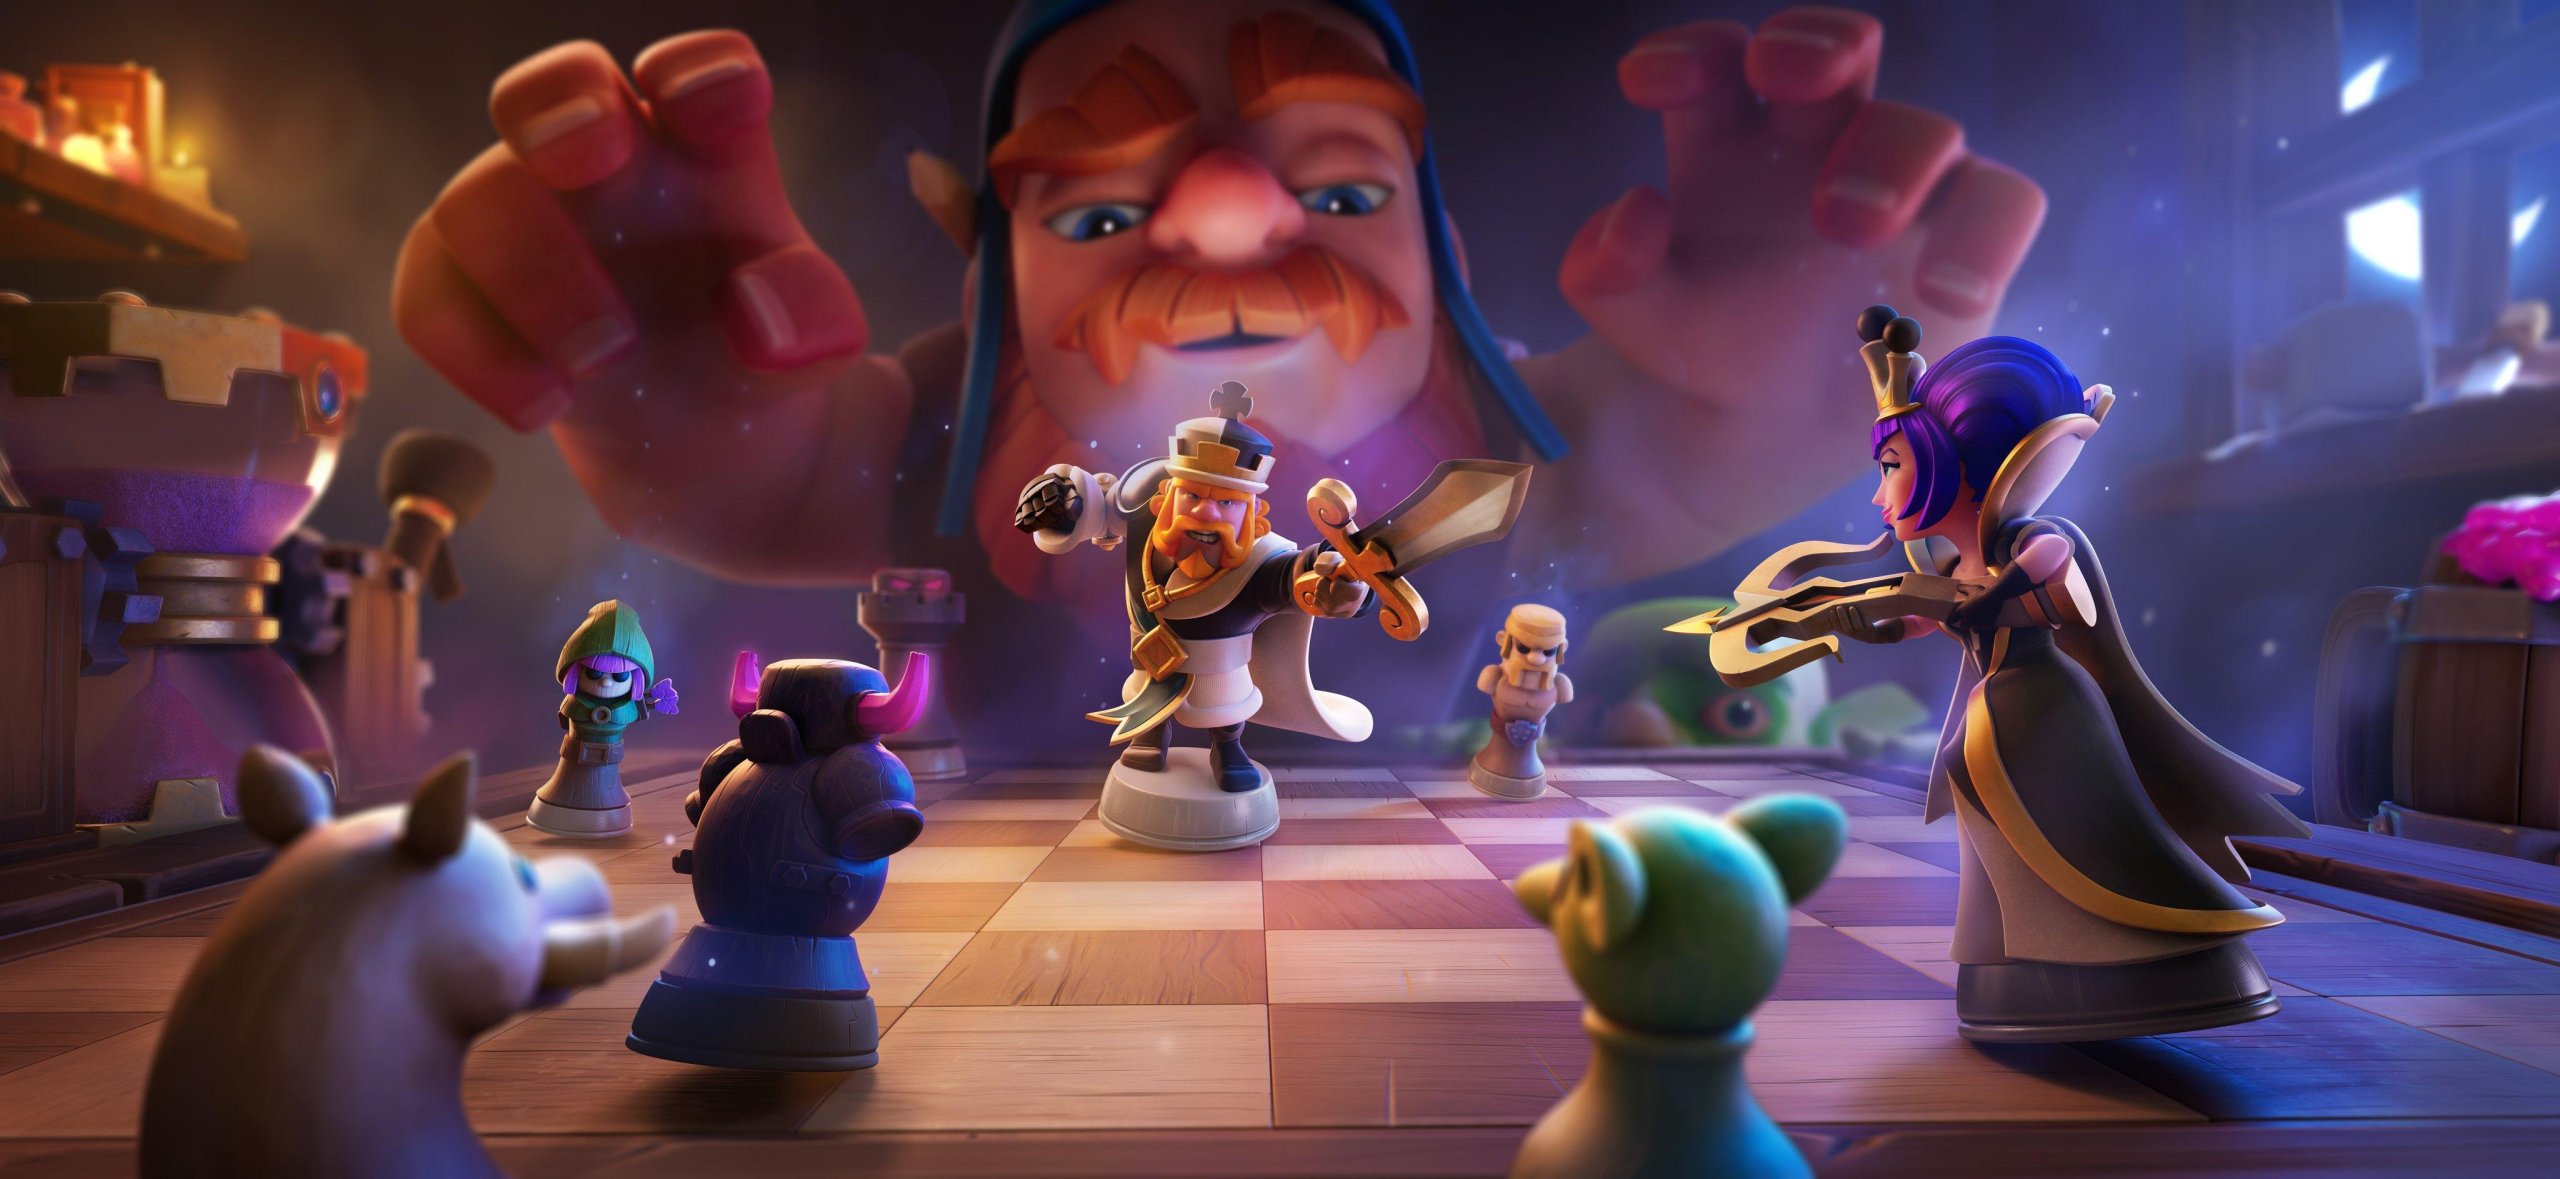 The rise of auto chess games: who'll win the autobattler war